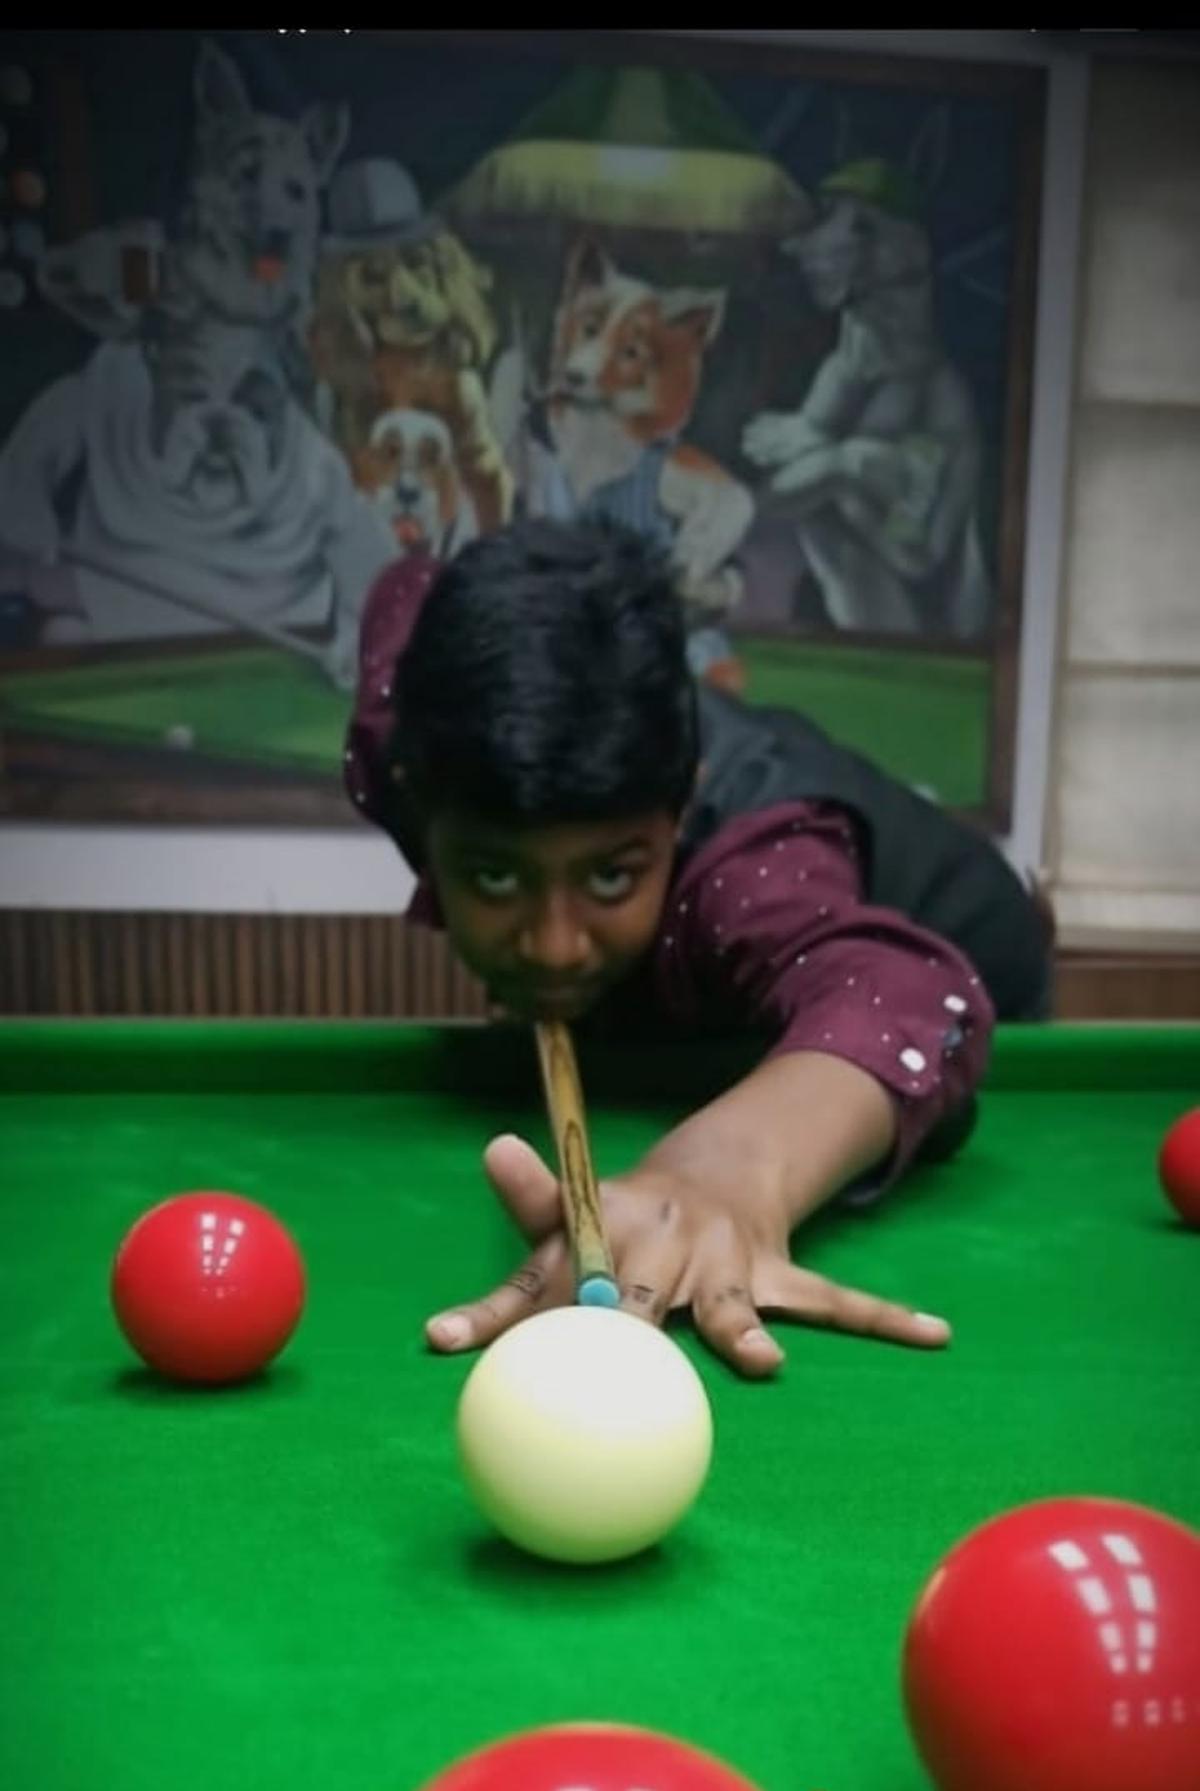 Student from Nilgiris set to represent India in World Under-17 Snooker Championship